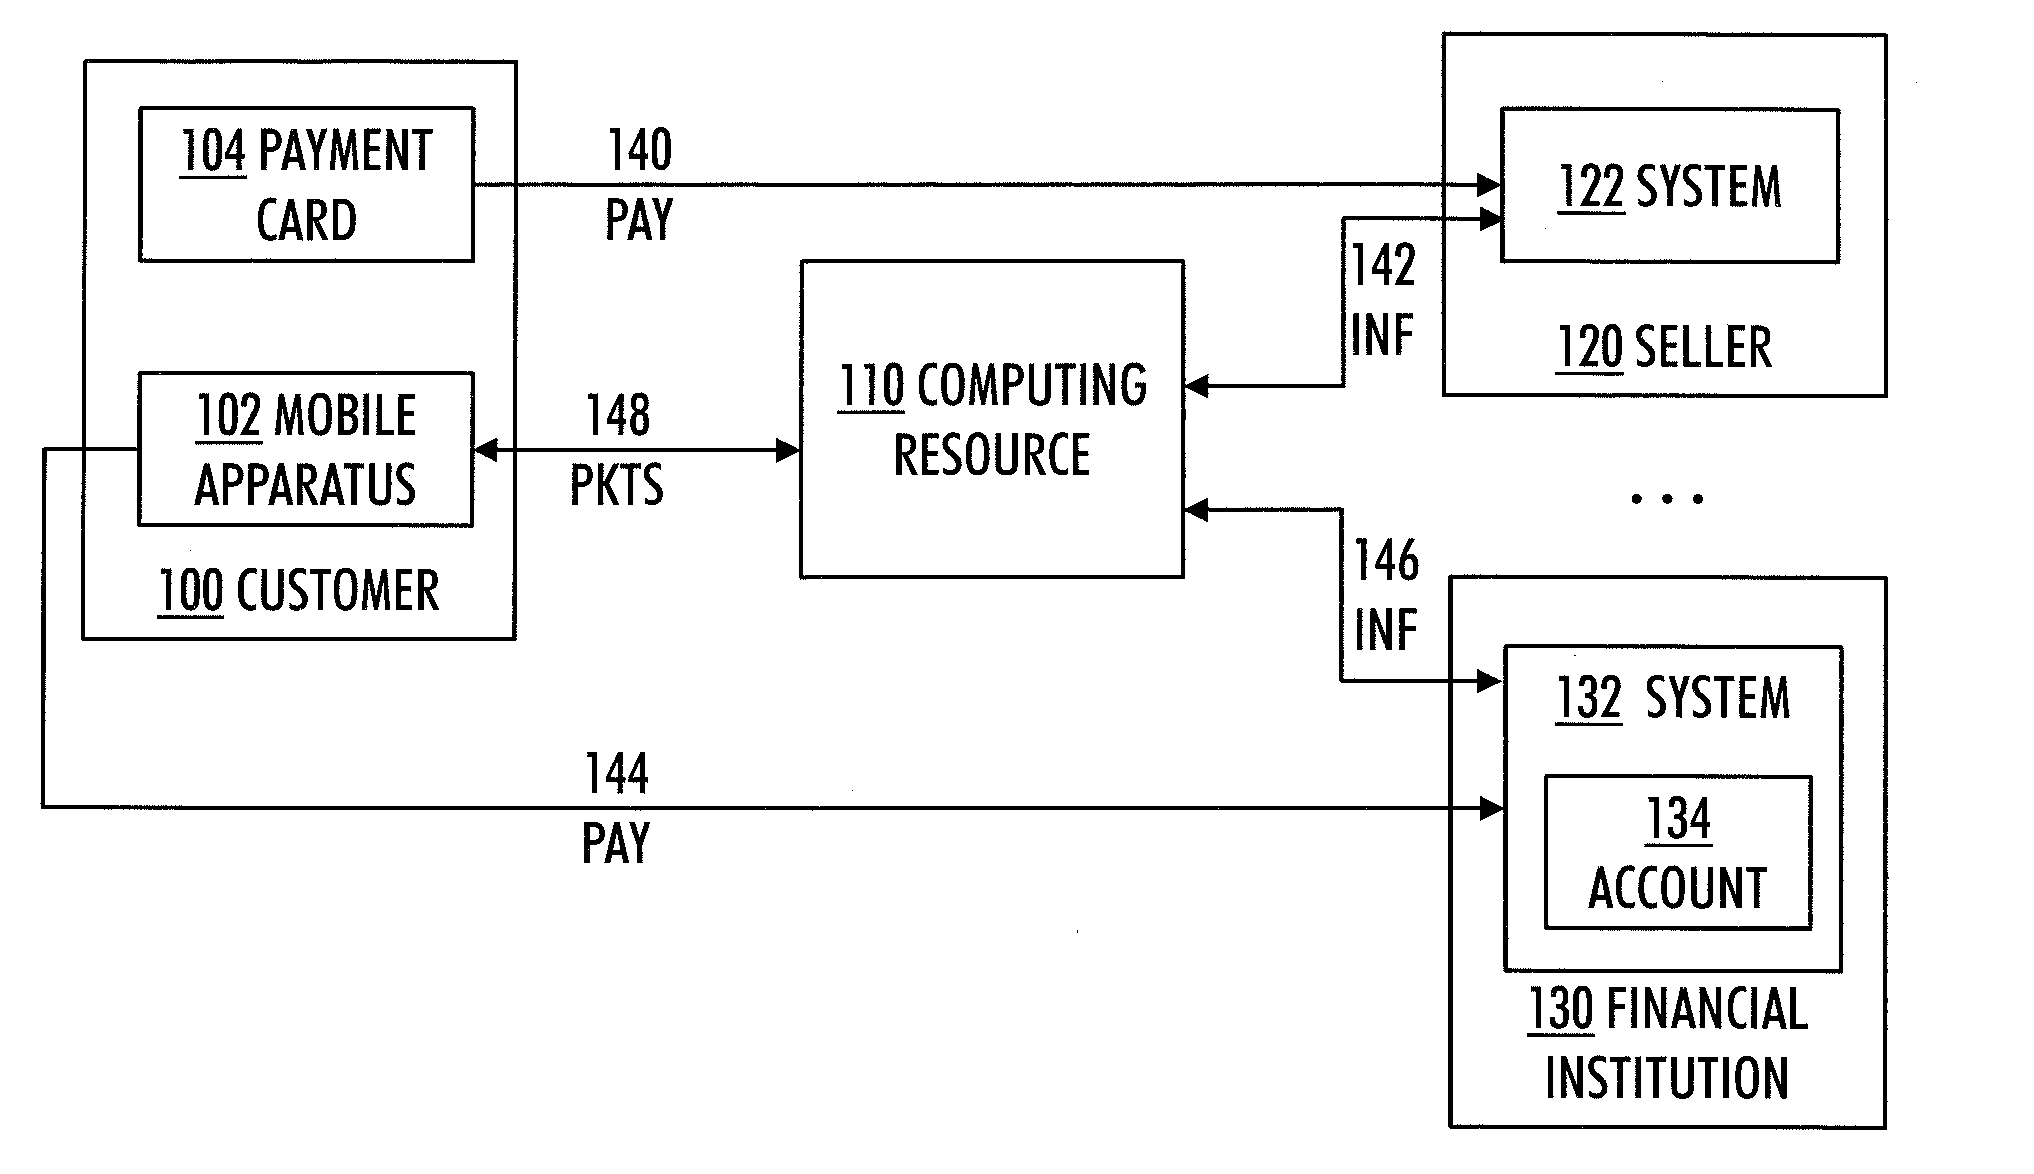 Mobile apparatus with transaction information